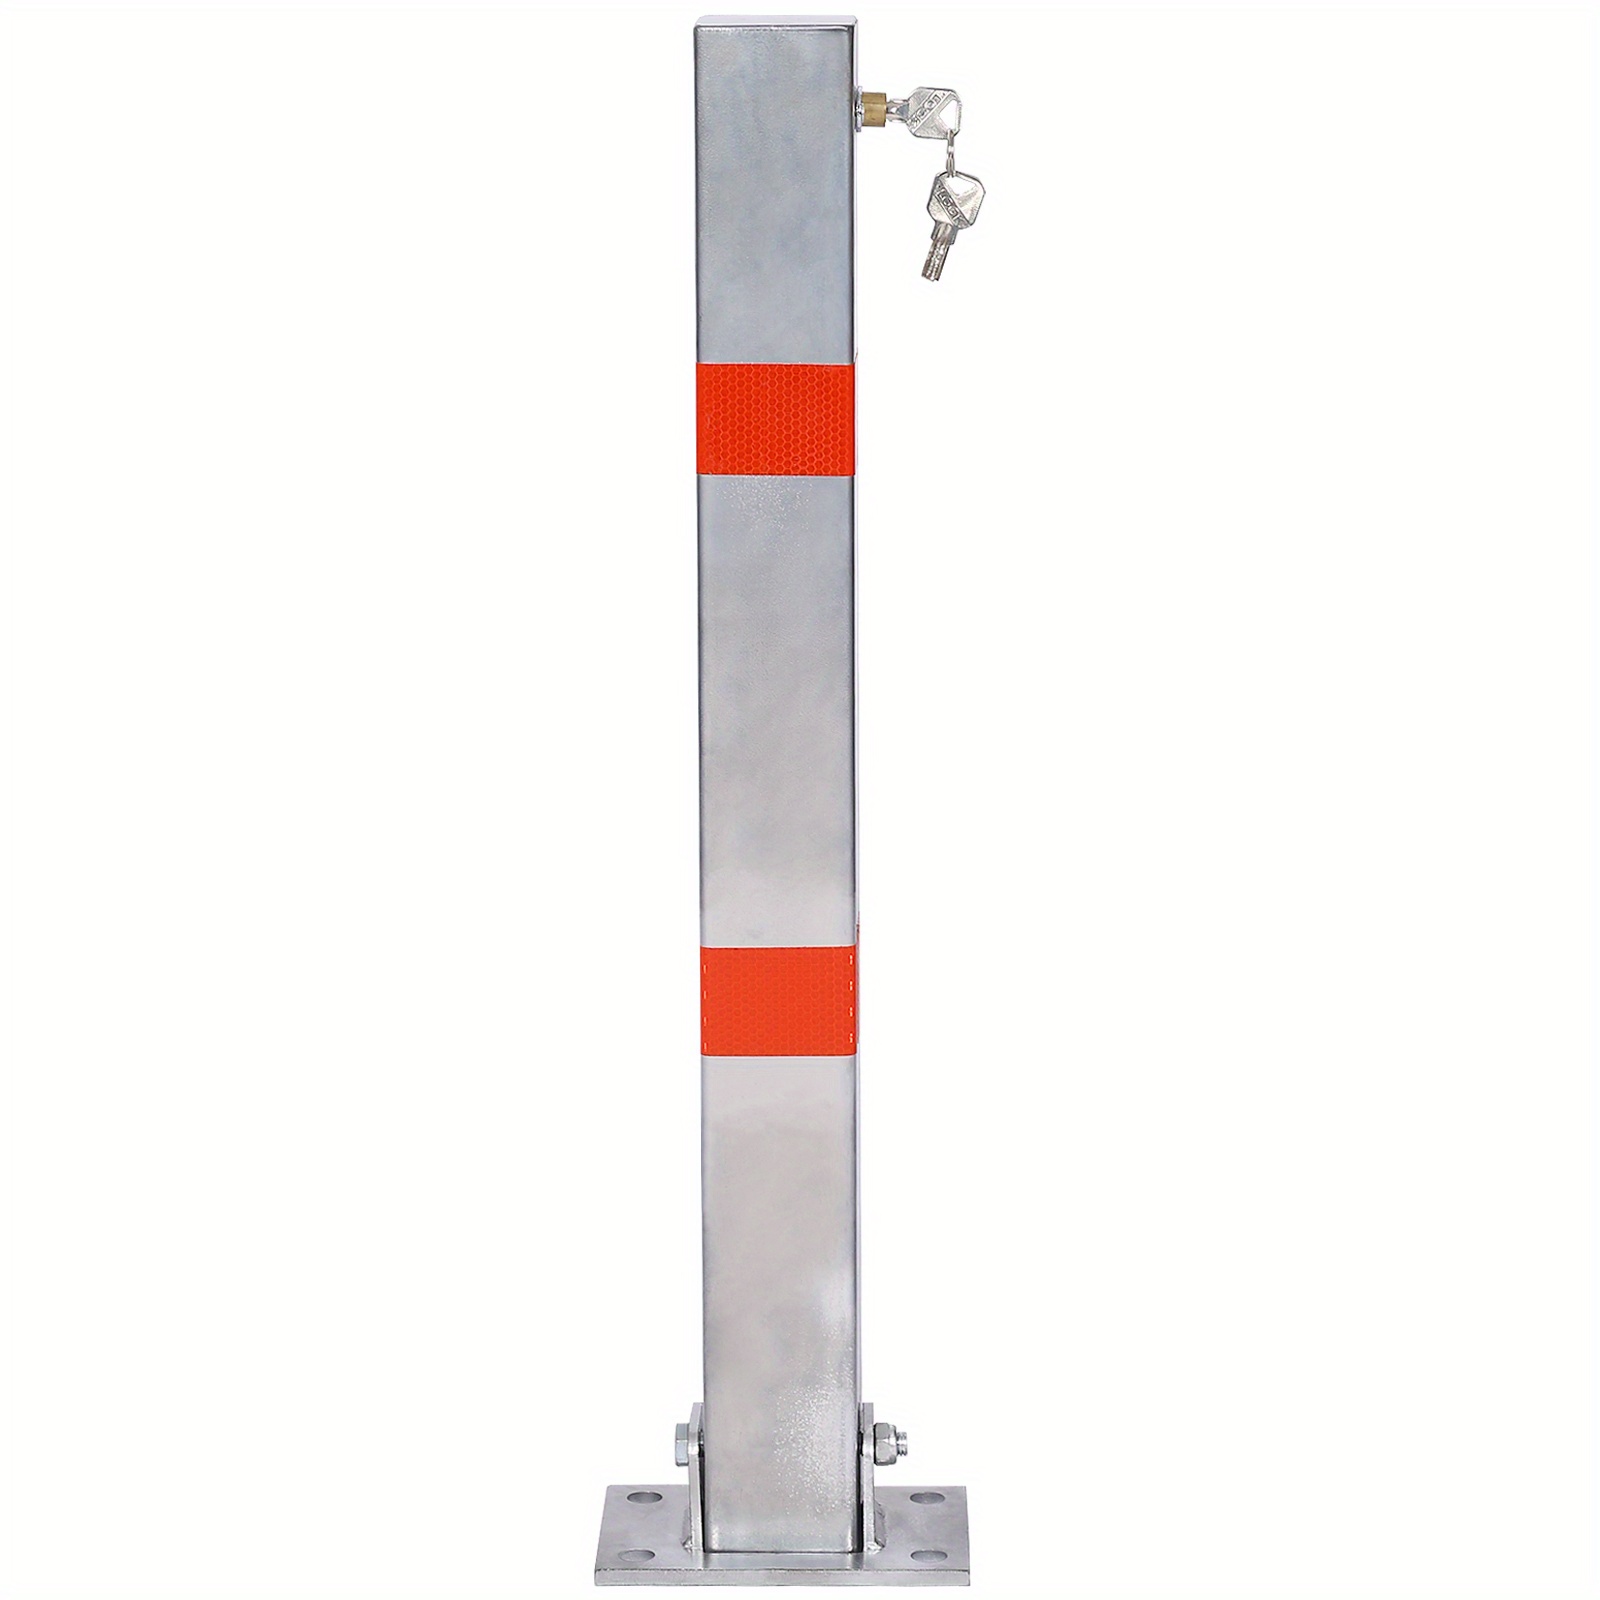 parking bollard pole barrier with lock car parking protection posts home garage street decor parking barrier square gray